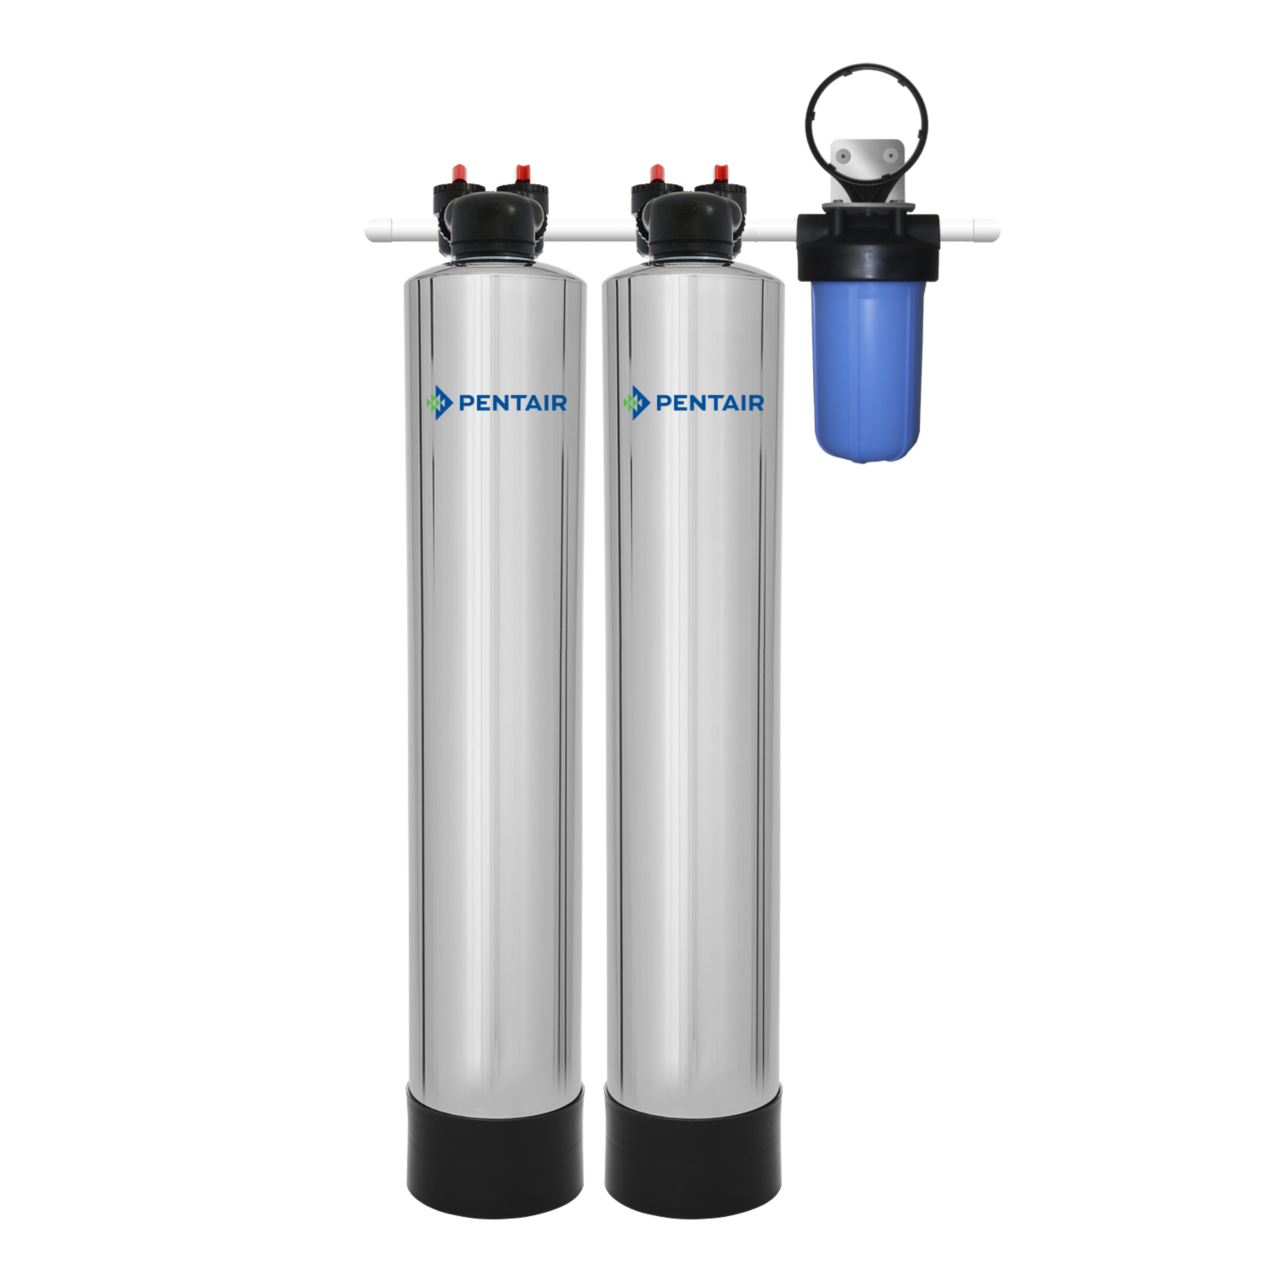 Portable Double Standard Water Softener - On The Go - Portable